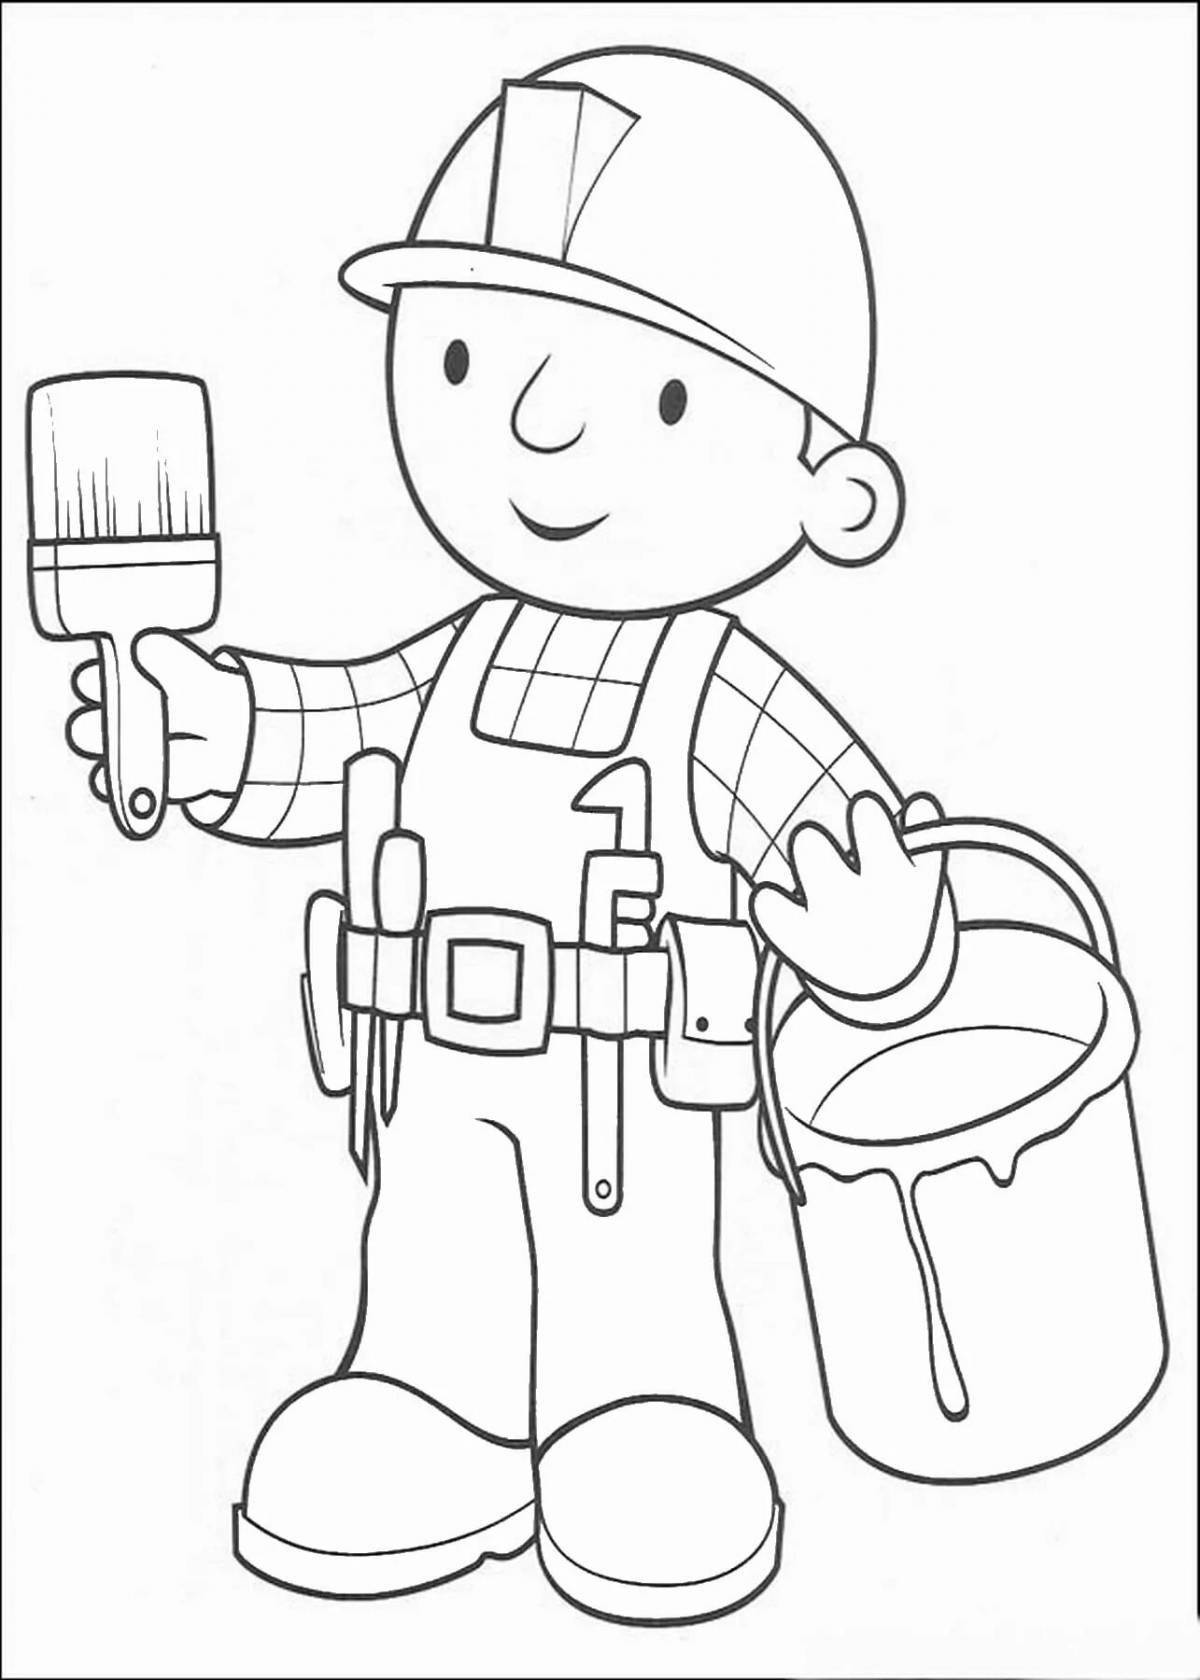 Colorful professions and tools coloring page